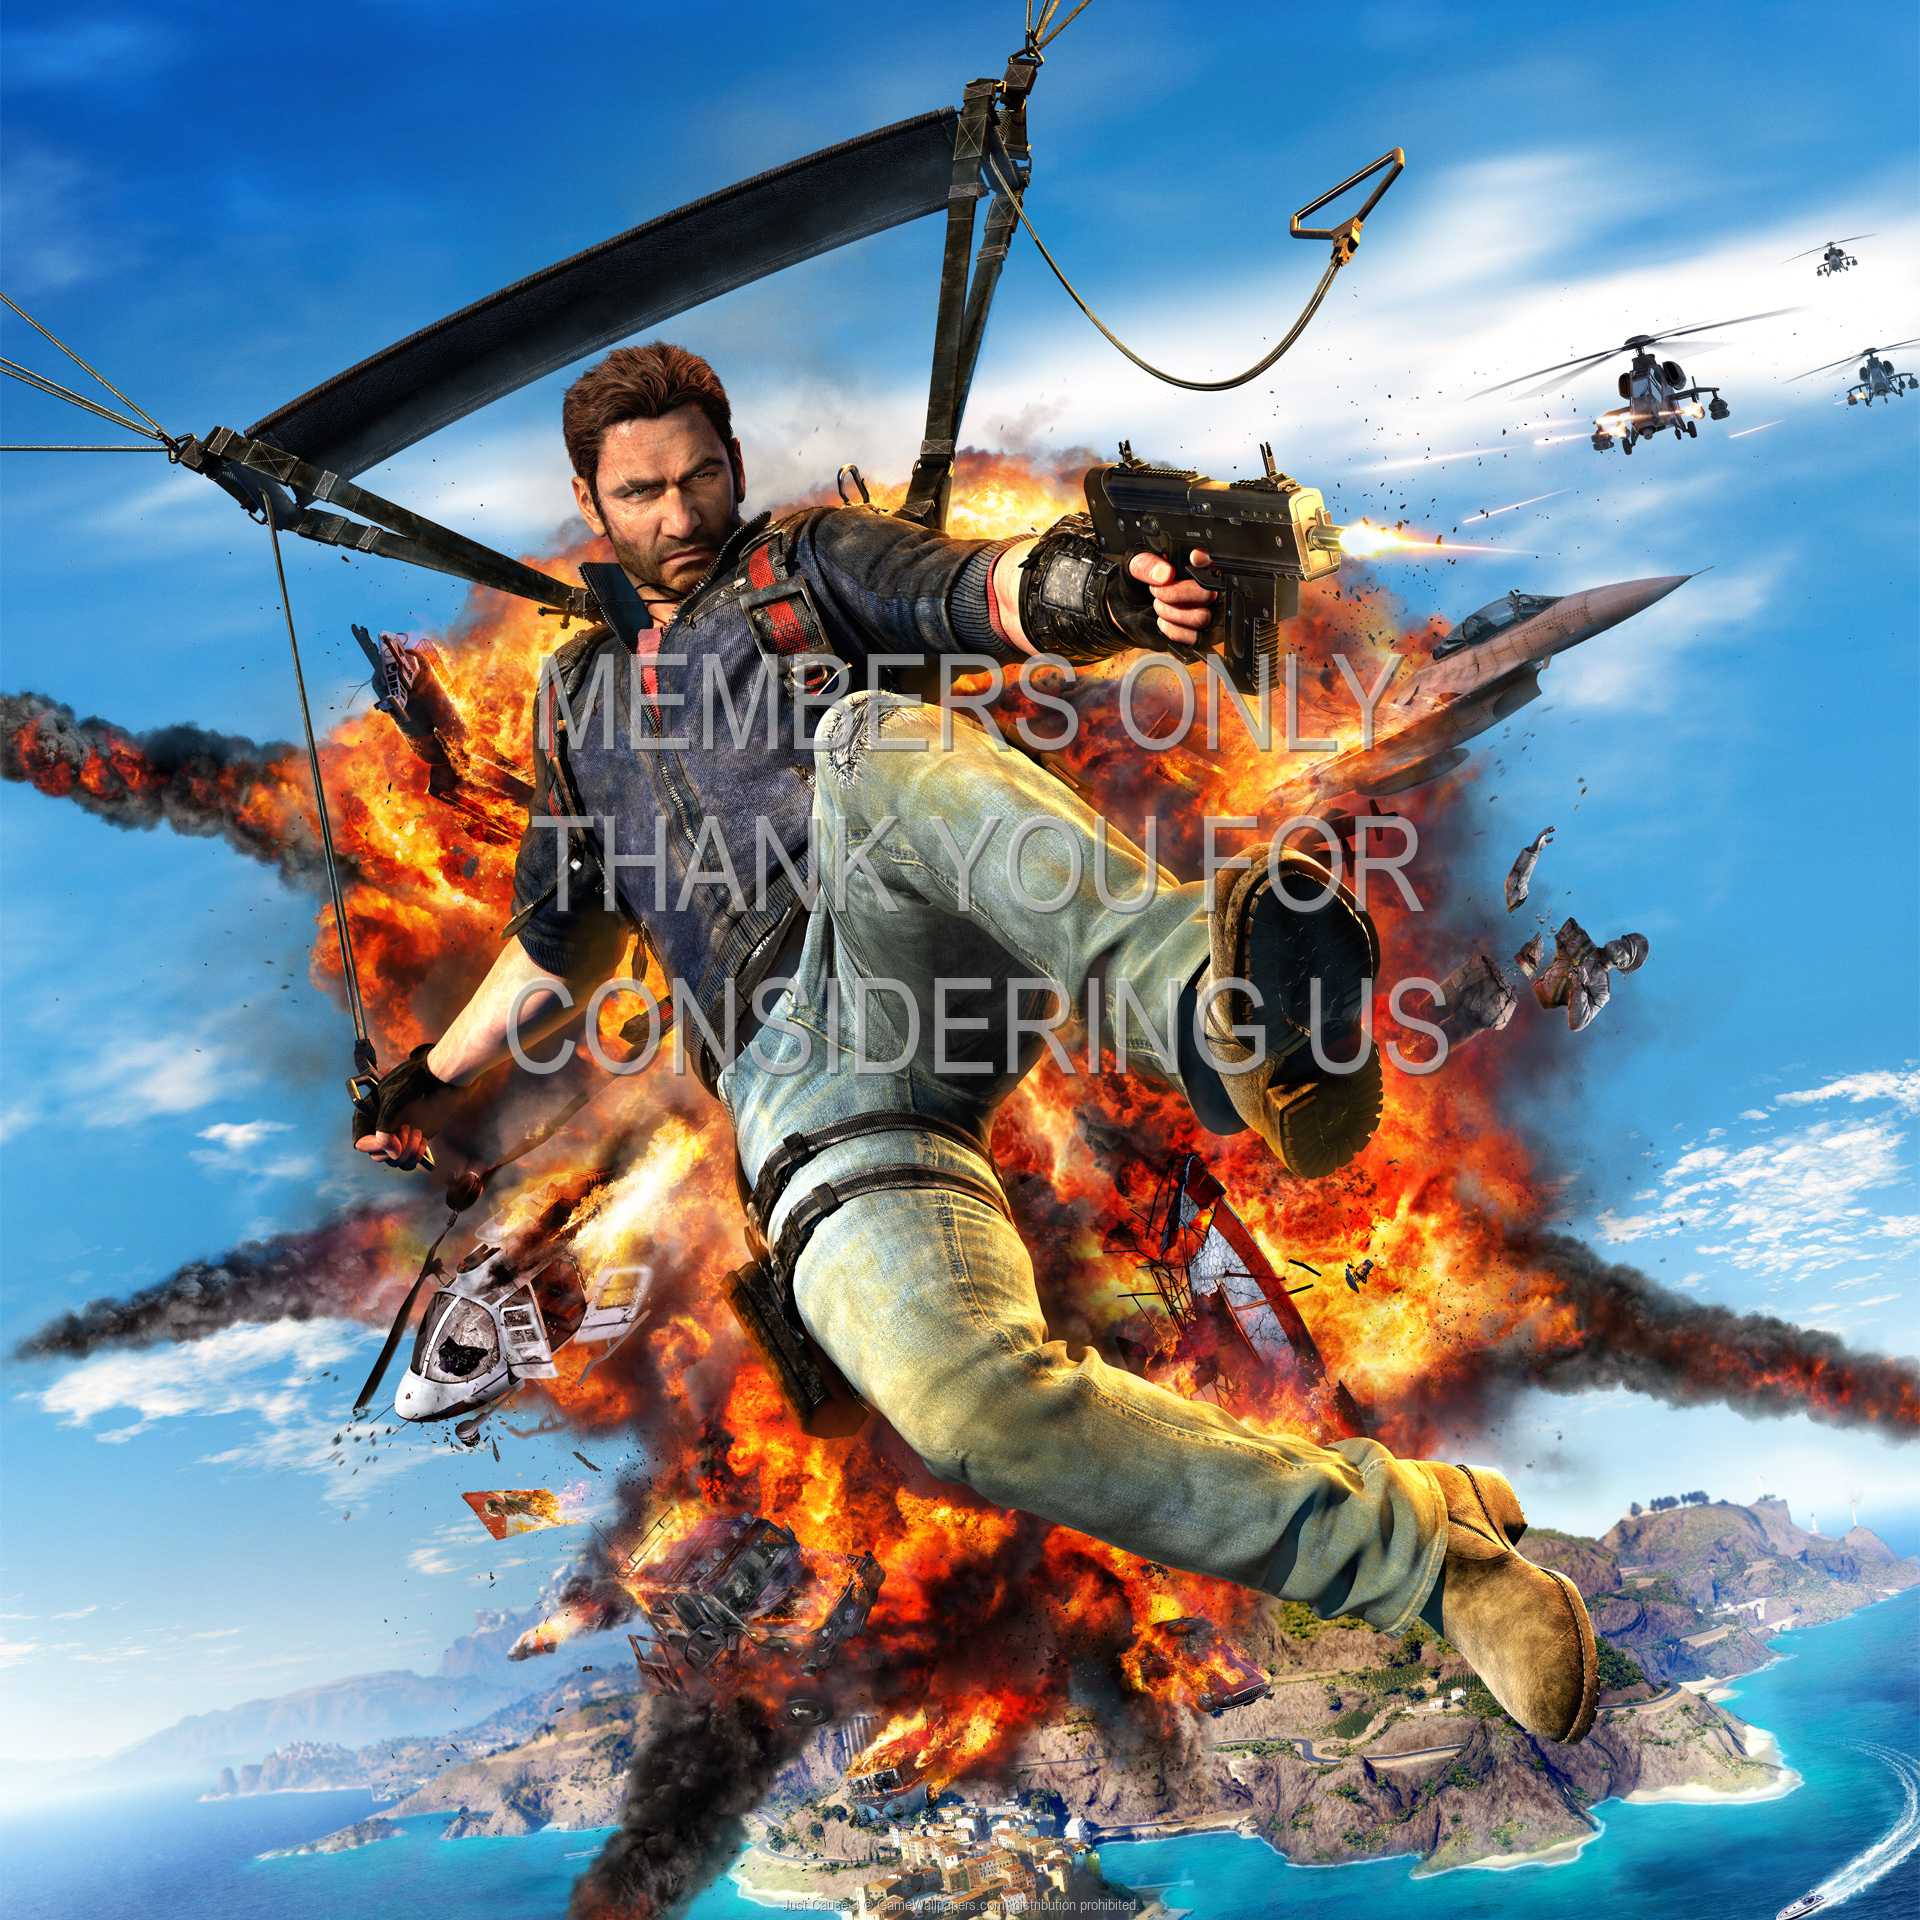 Just Cause 3 1080p%20Horizontal Mobile wallpaper or background 01